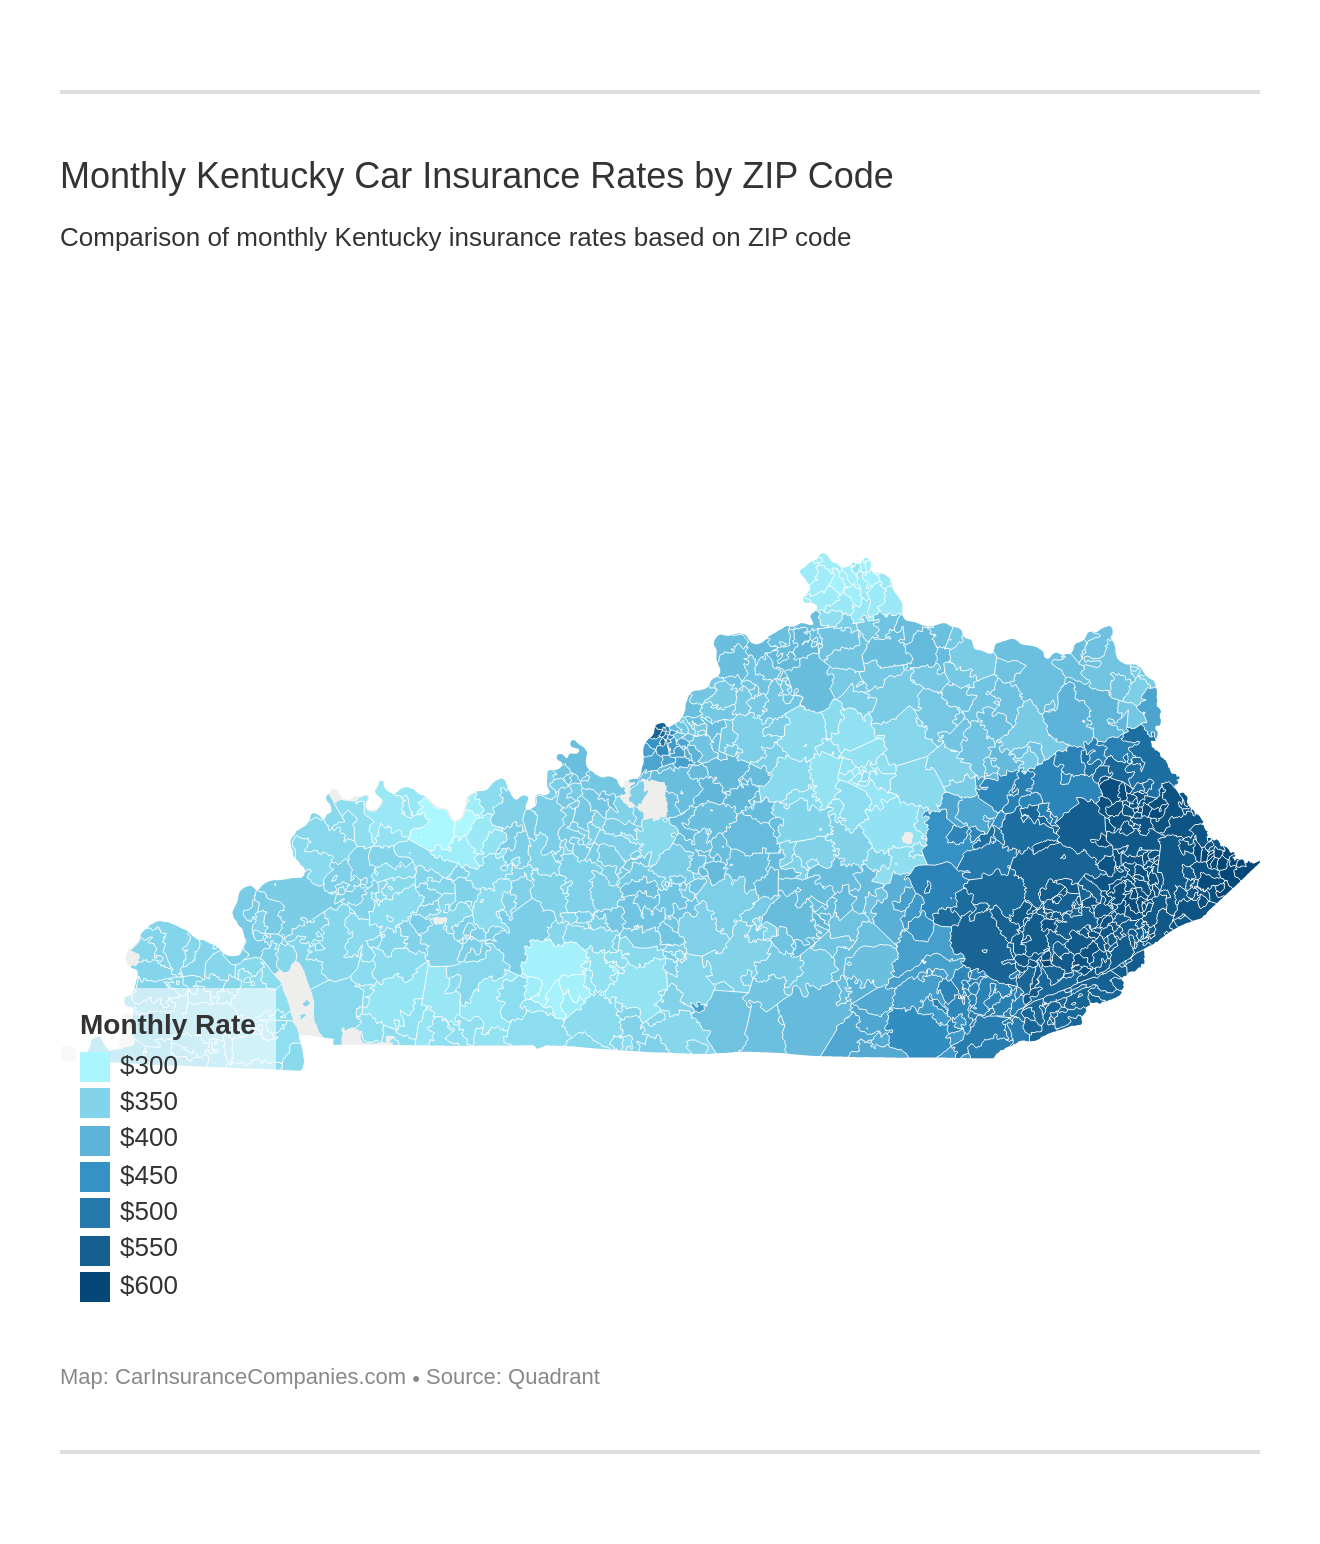 Monthly Kentucky Car Insurance Rates by ZIP Code